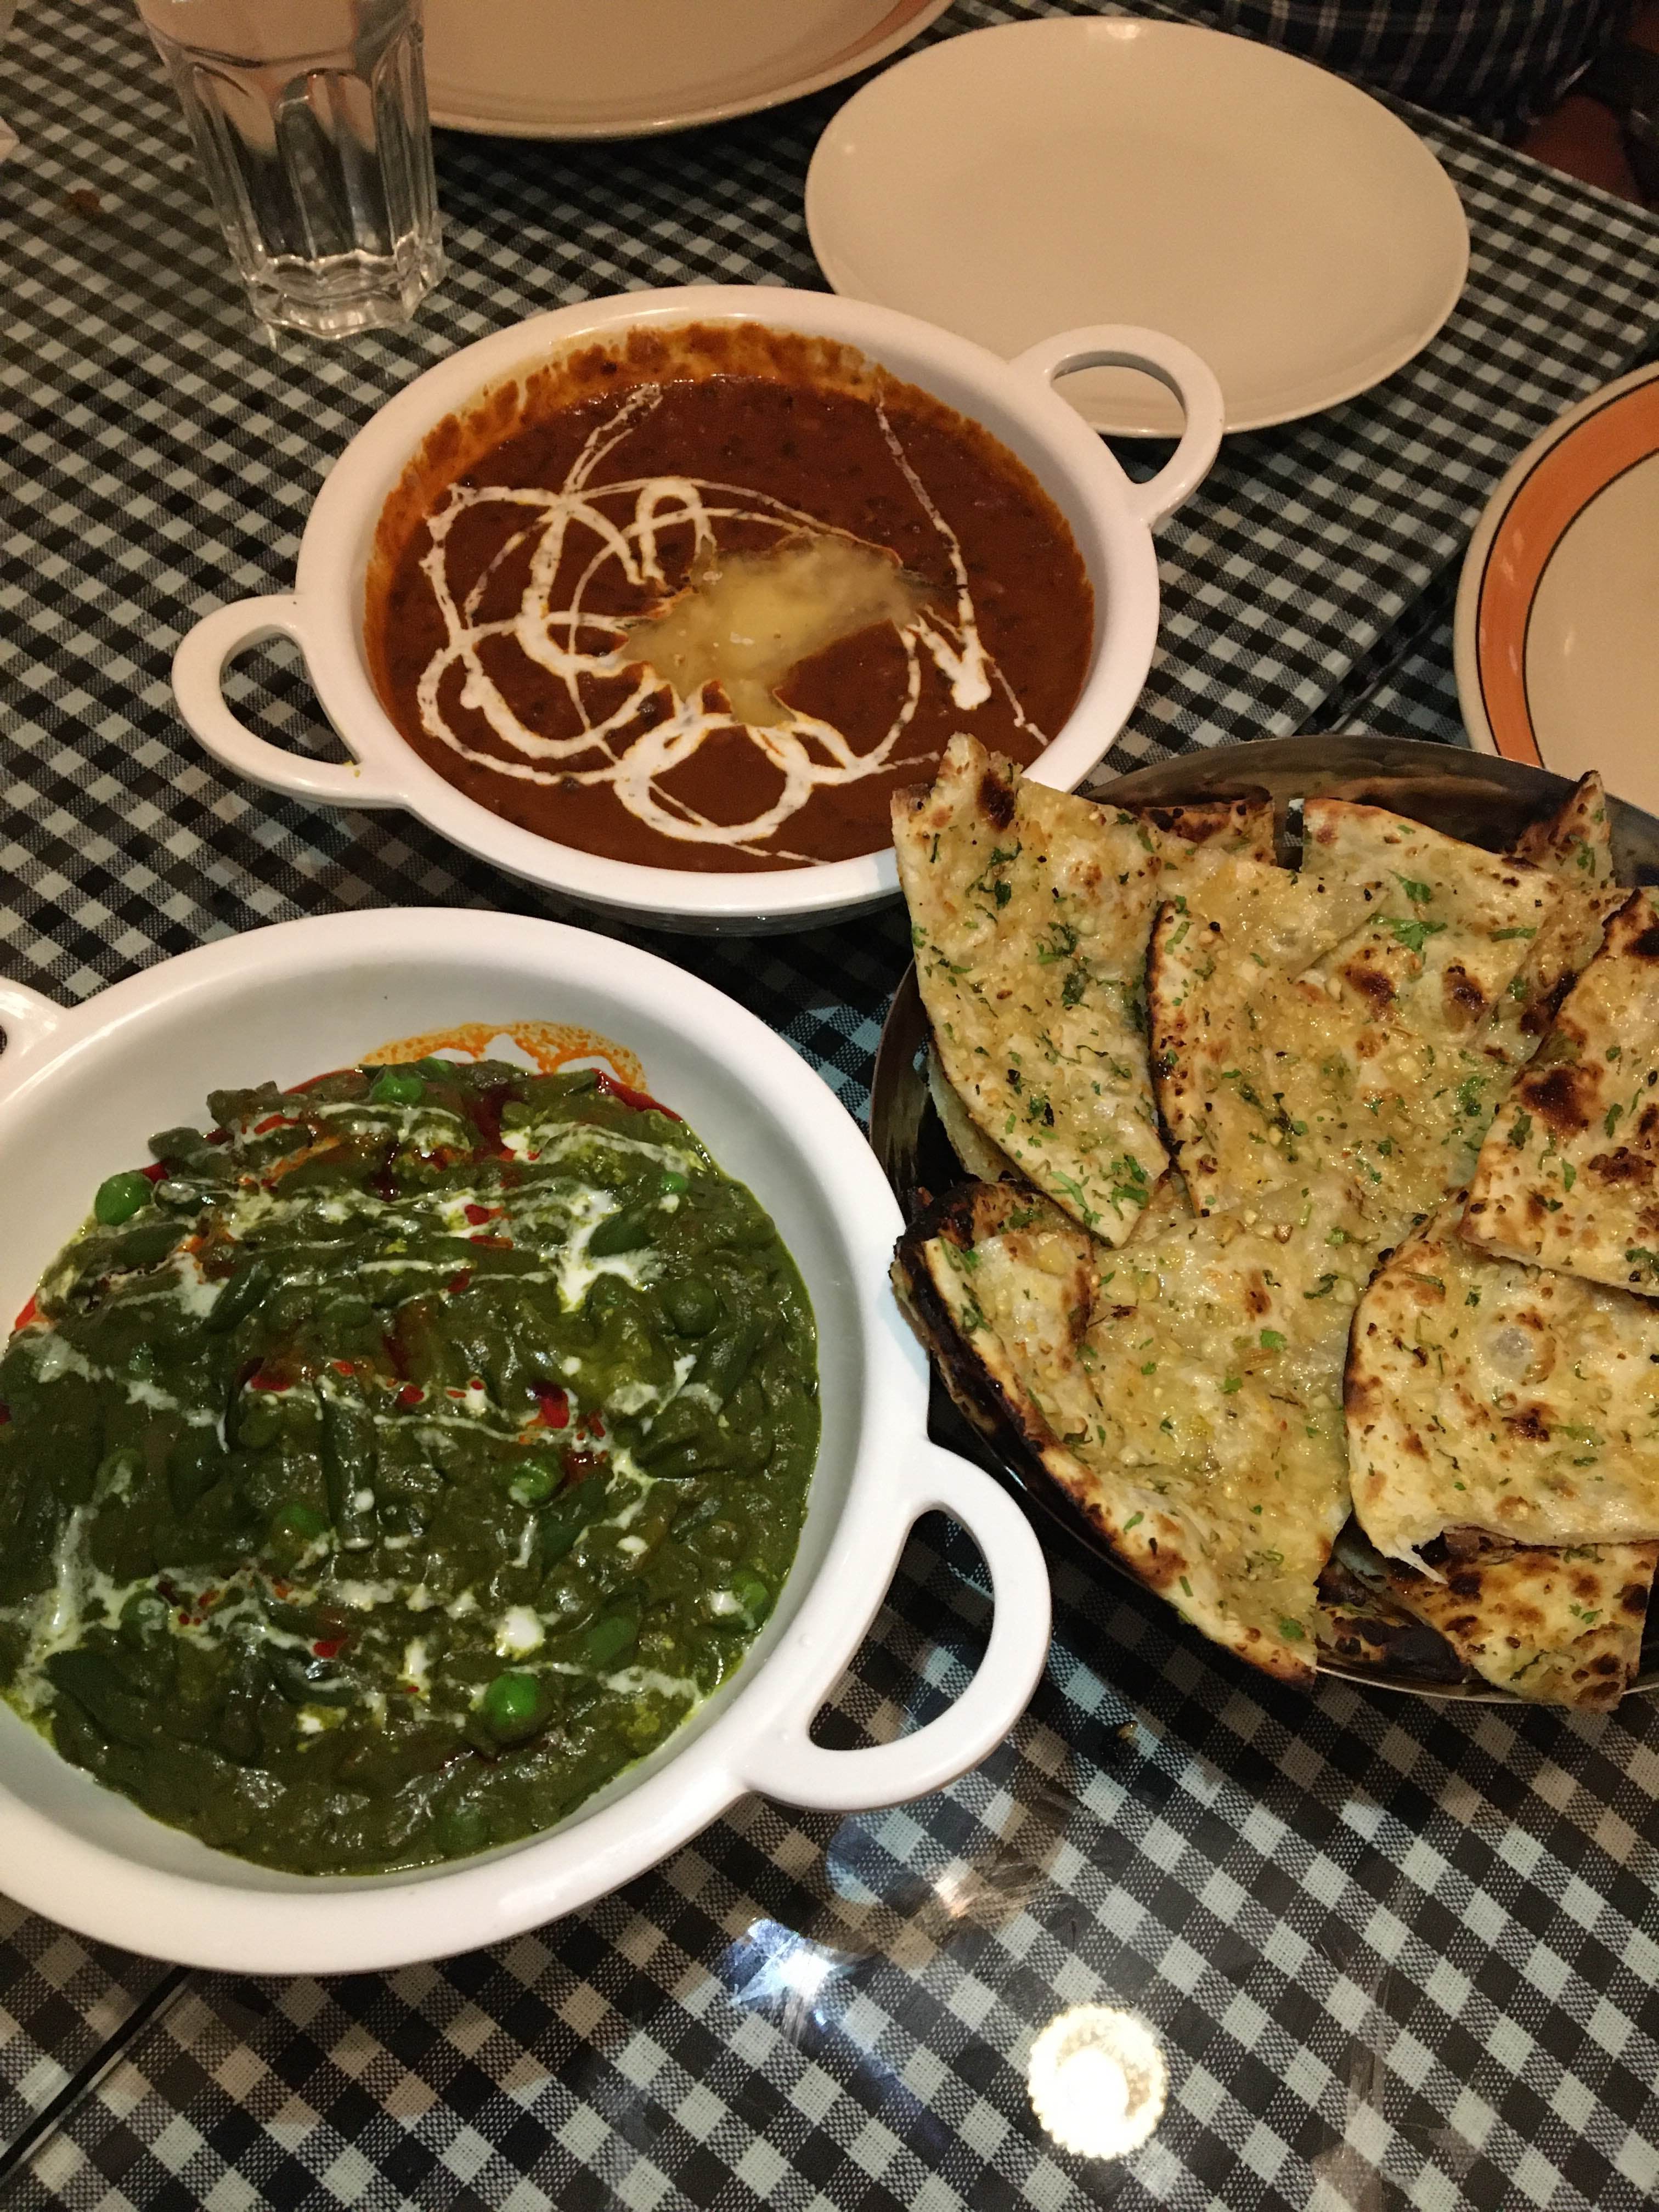 Dish,Food,Cuisine,Ingredient,Saag,Produce,Flatbread,Meal,Paratha,Lunch